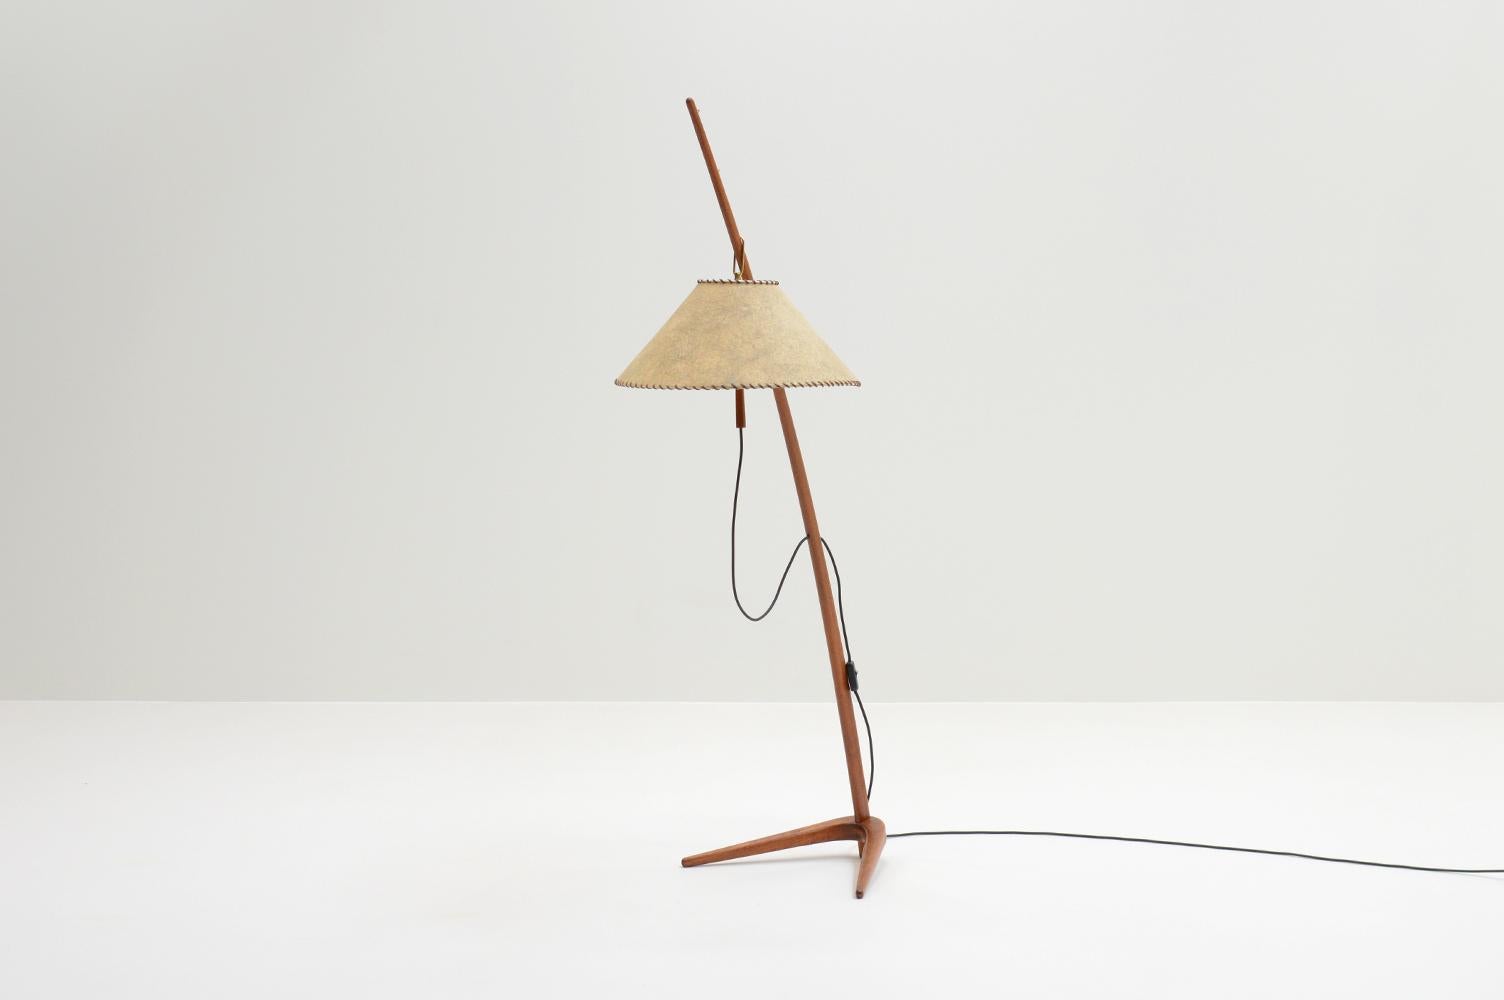 Dornstab floor lamp by J.T. Kalmar and A. Pöll for Kalmar Werkstätten, 1940s Austria. The Dornstab is back into production, but this is the original 1st version dating back to 1947. Solid teak with brass hooks to change the height of the shade. The